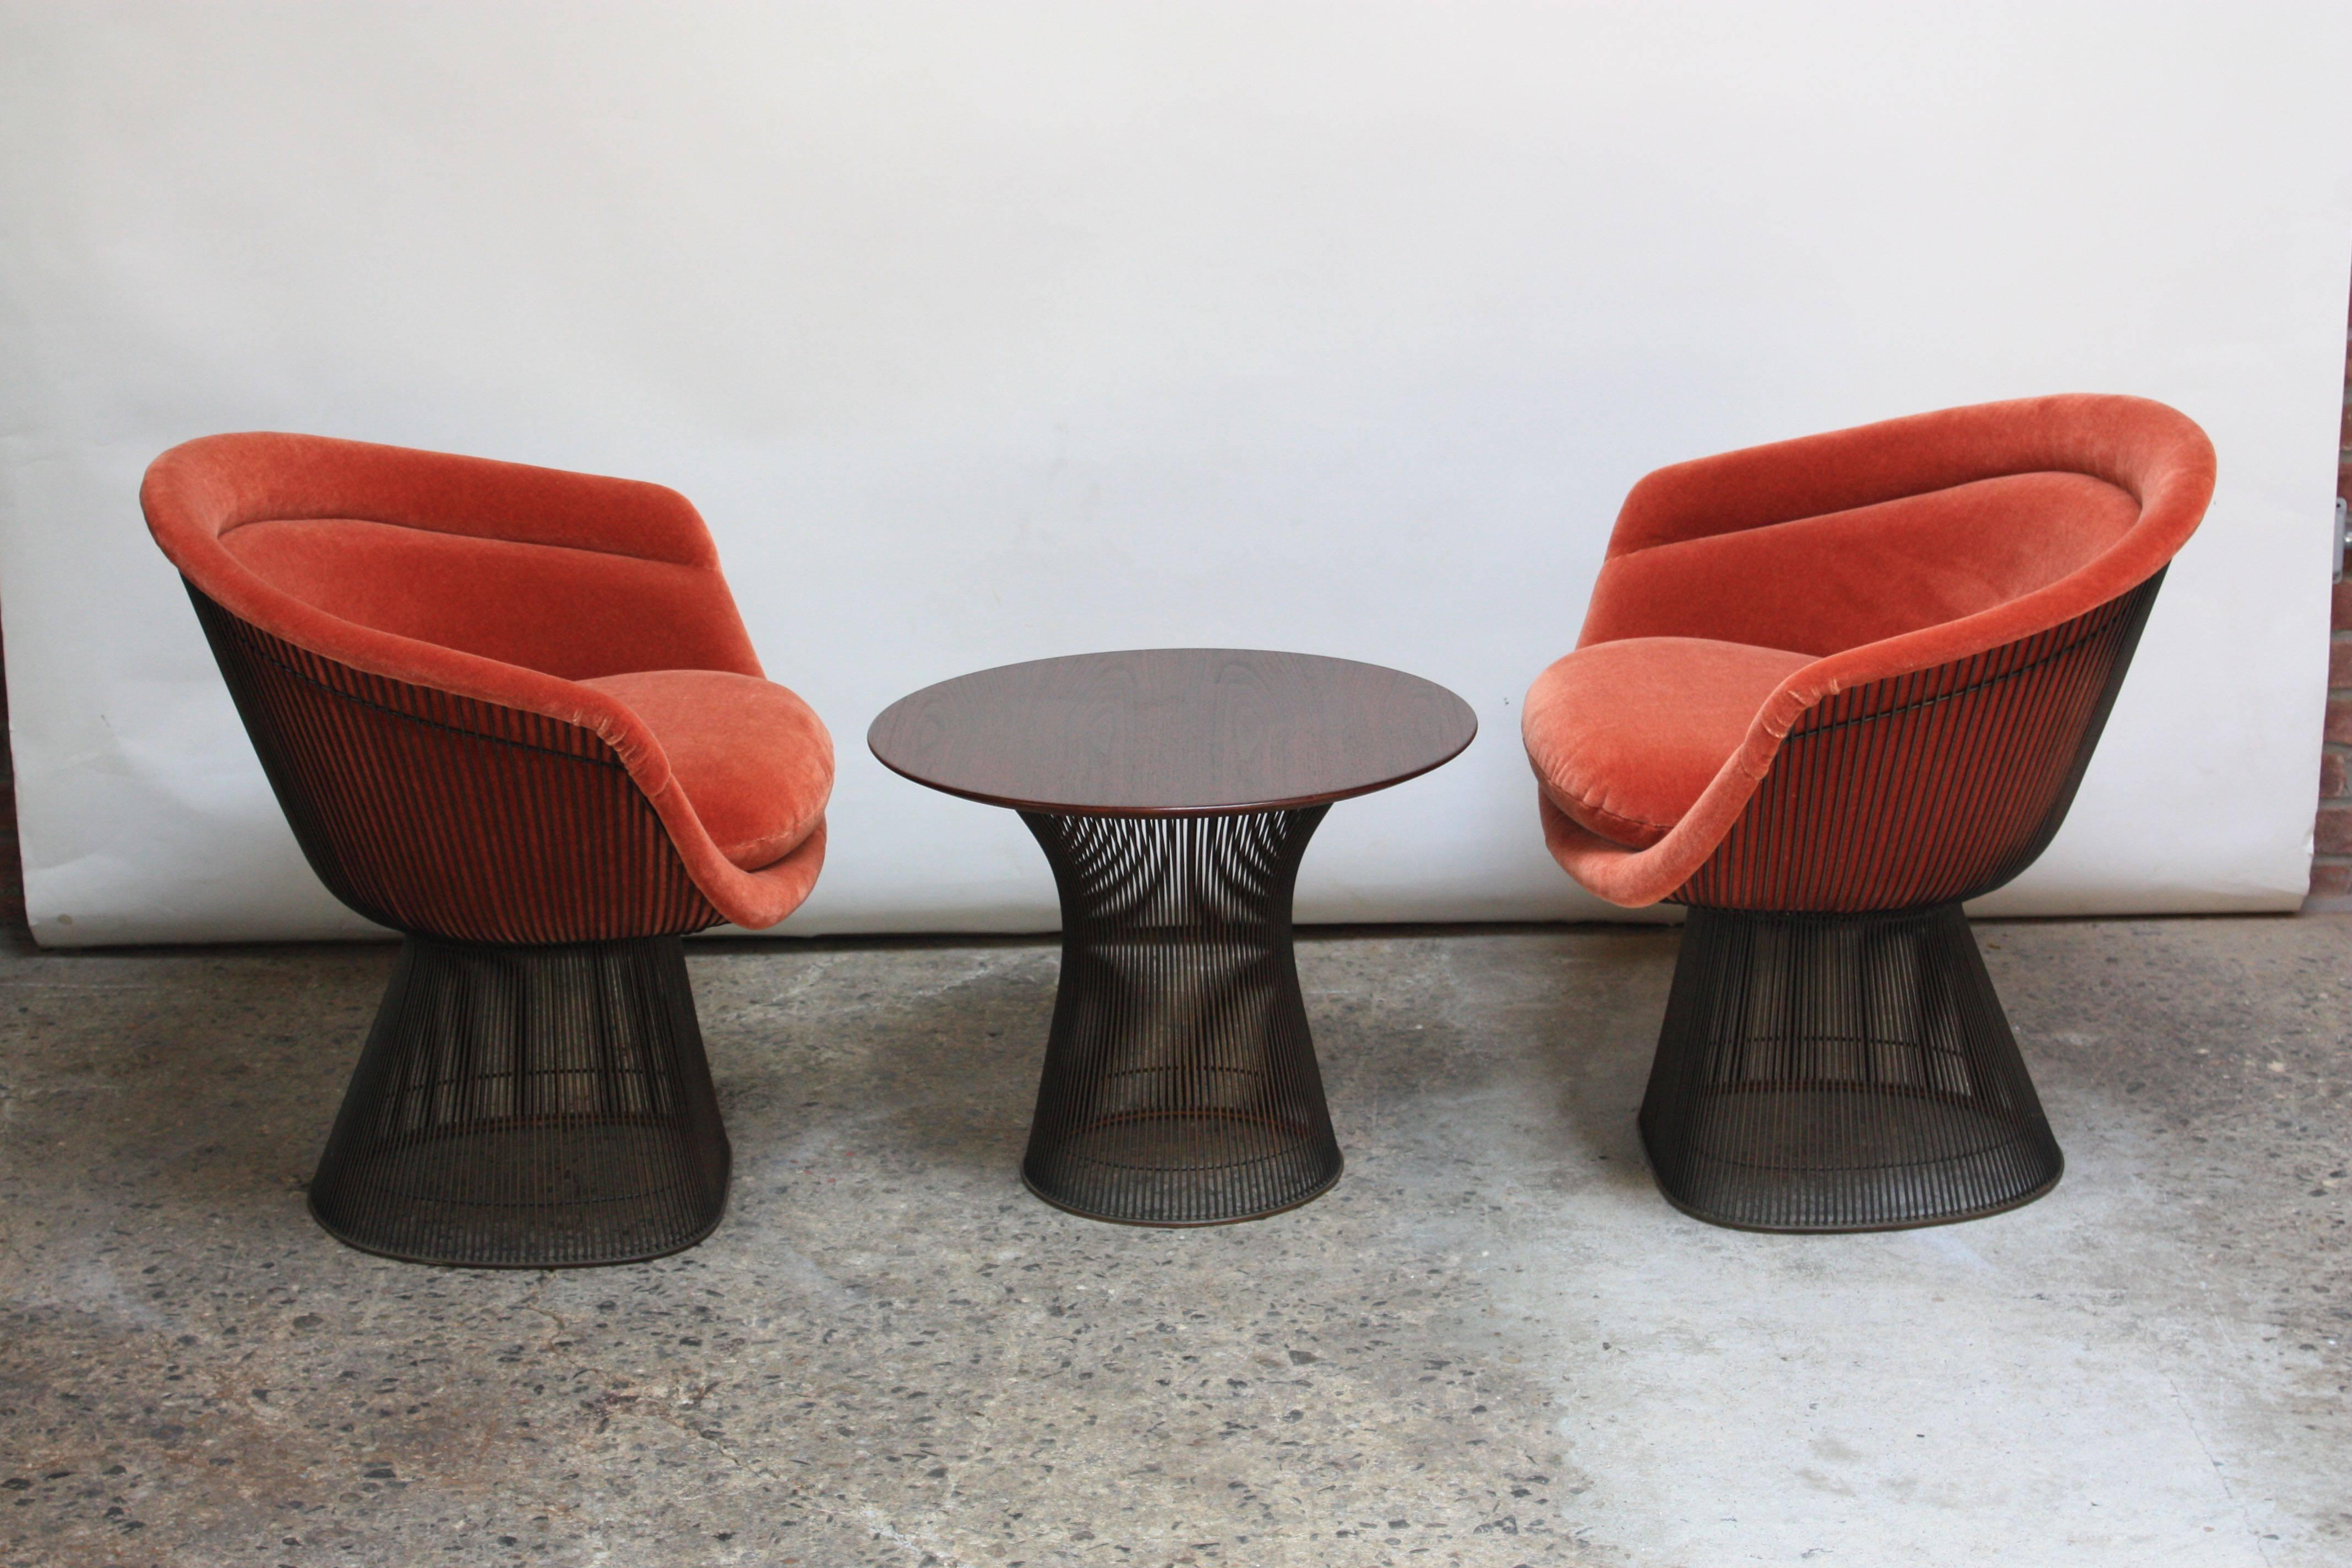 Suite of early (circa 1966) Warren Platner for Knoll Associates bronze-framed pieces: two wire lounge chairs redone in blood orange mohair and one wire-framed, walnut-top occasional table. Steel-rod construction with bronze-plate (a finish no longer